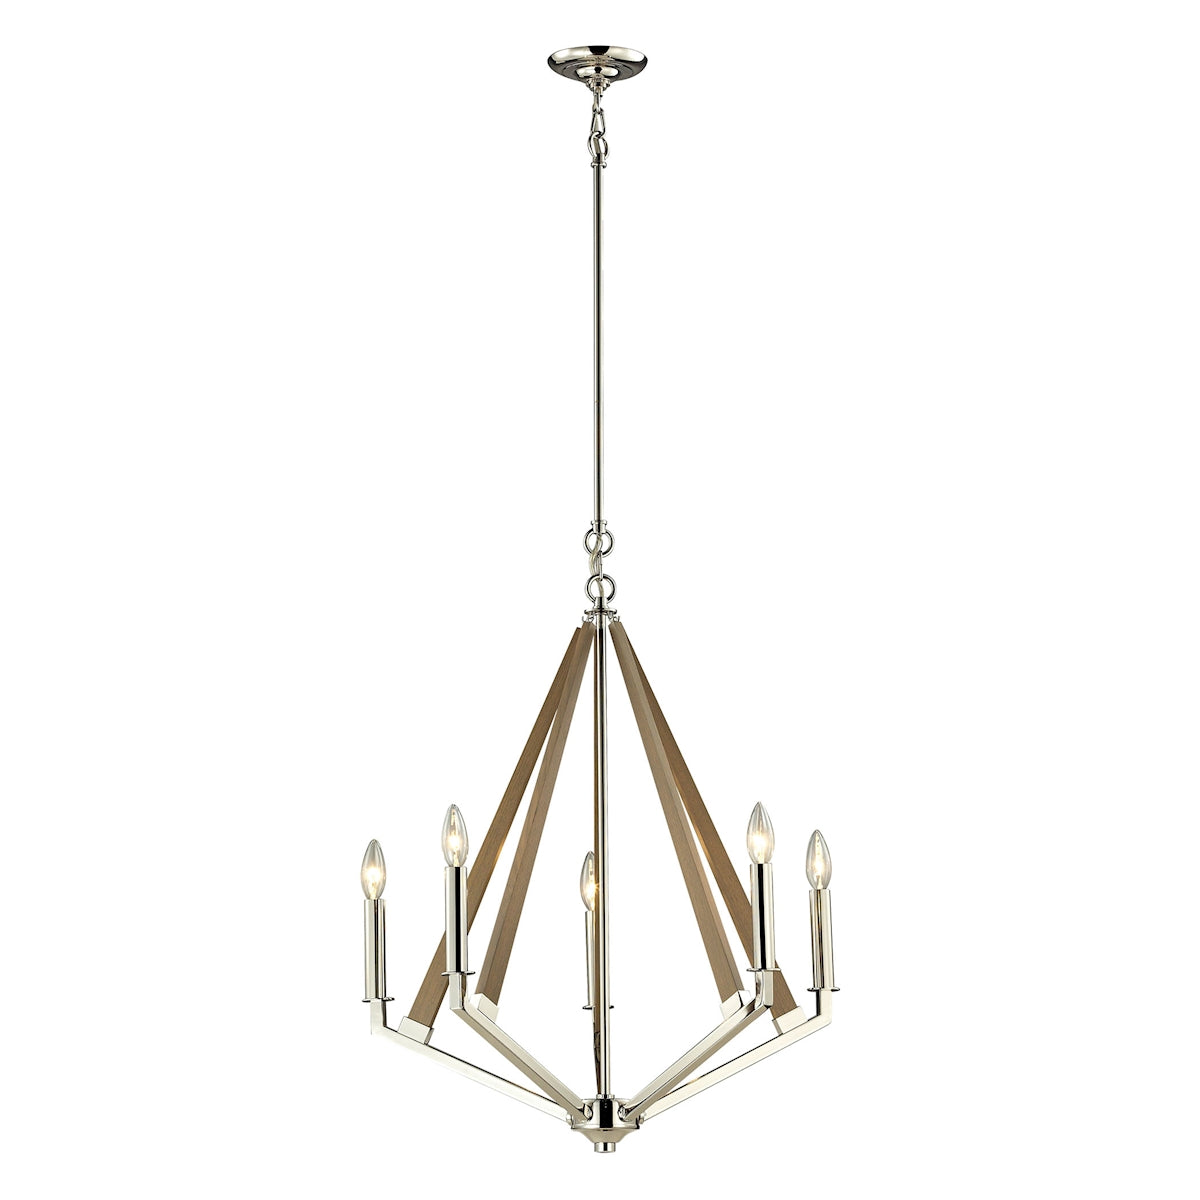 ELK Lighting 31475/5 Madera 5-Light Chandelier in Polished Nickel and Taupe